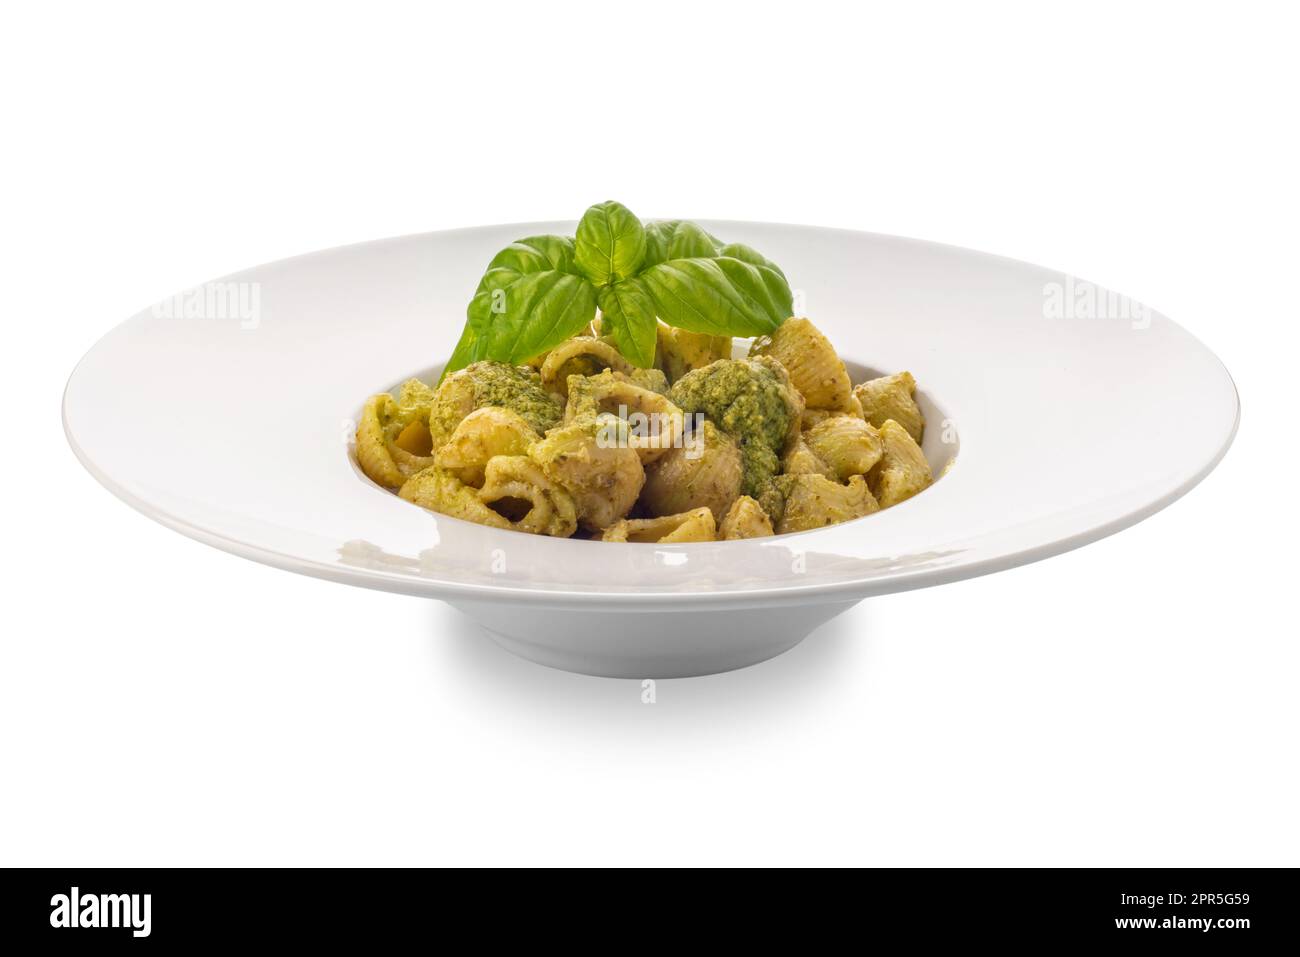 Macaroni pasta with pesto in a white dish with basil leaves, pesto is a typical Genoese sauce of basil, pine nuts, olive oil and parmesan cheese. Isol Stock Photo